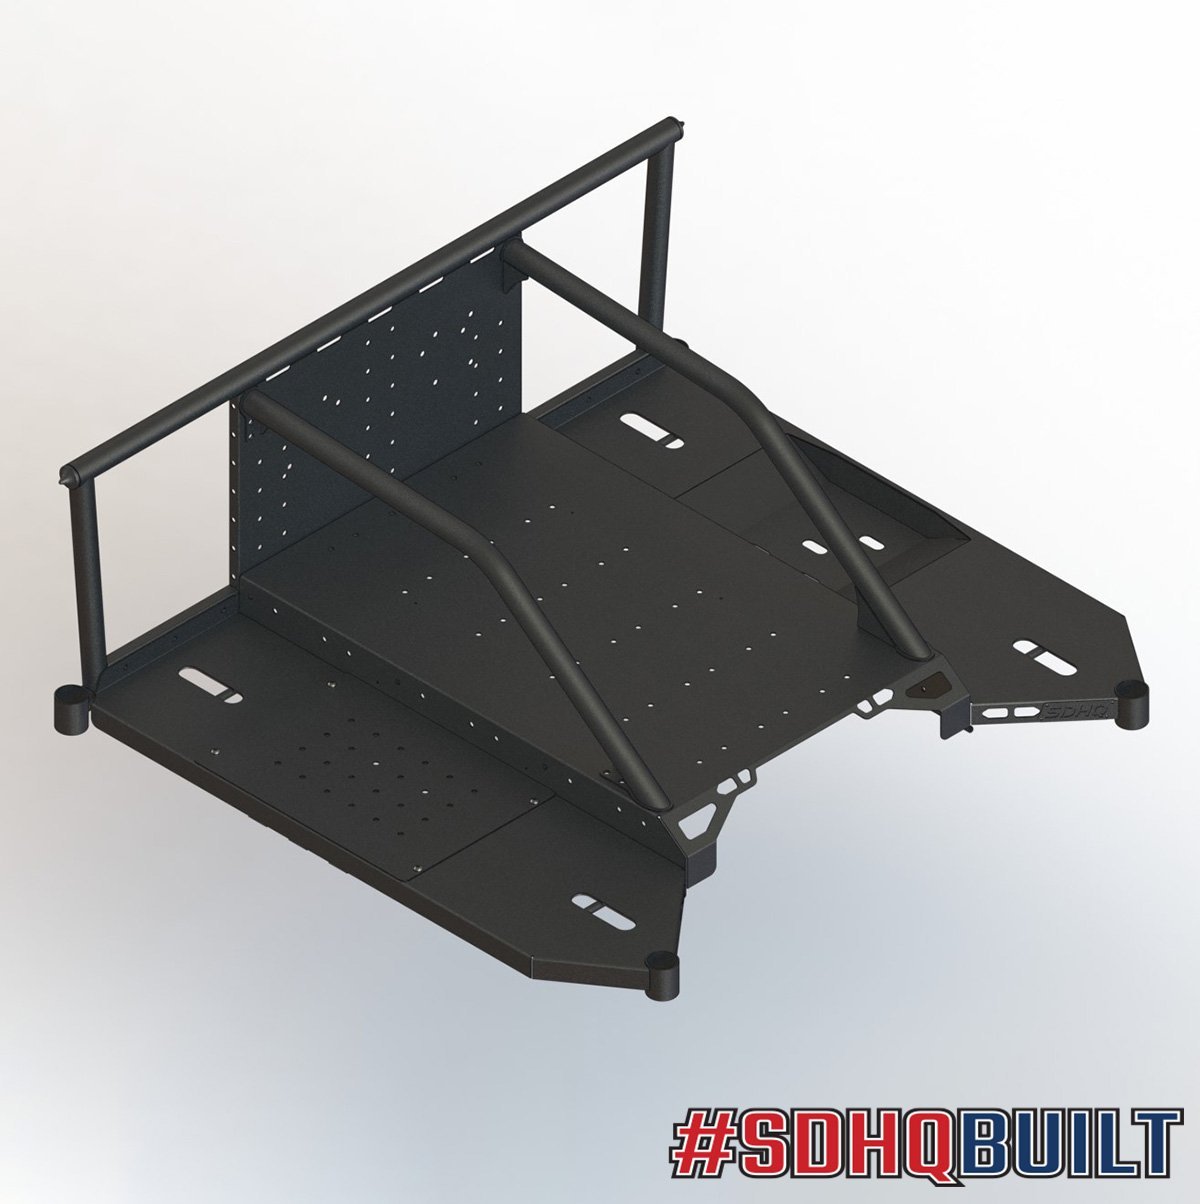 SDHQ Built In-Bed Rack Full Size Truck Tire Cradle Delete Plate Chase Rack Accessories SDHQ Off Road